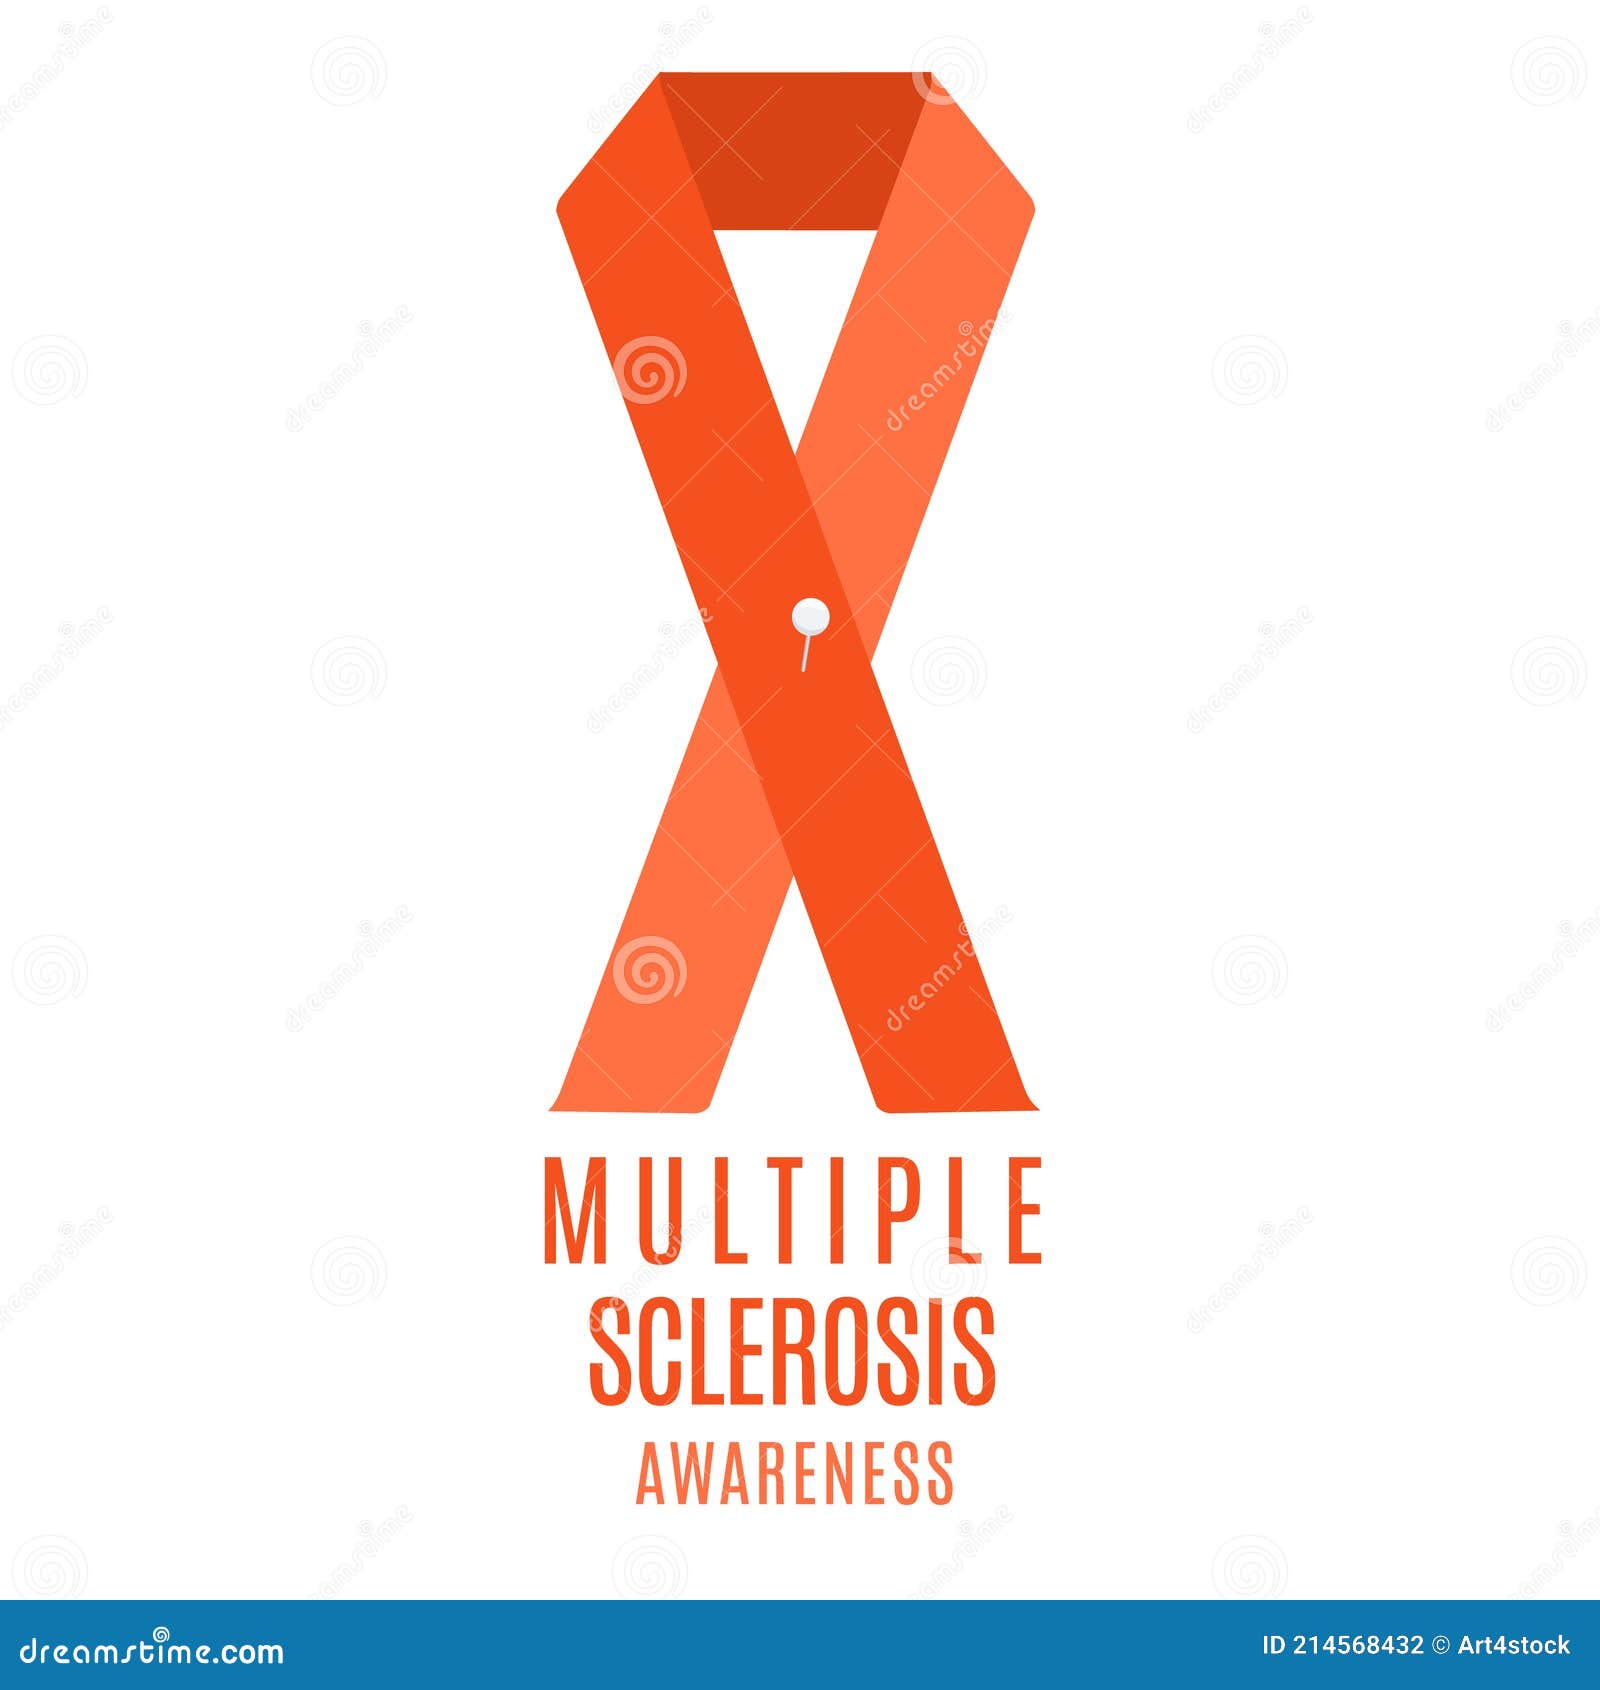 Multiple Sclerosis Awareness Ribbon With A Pin Stock Vector